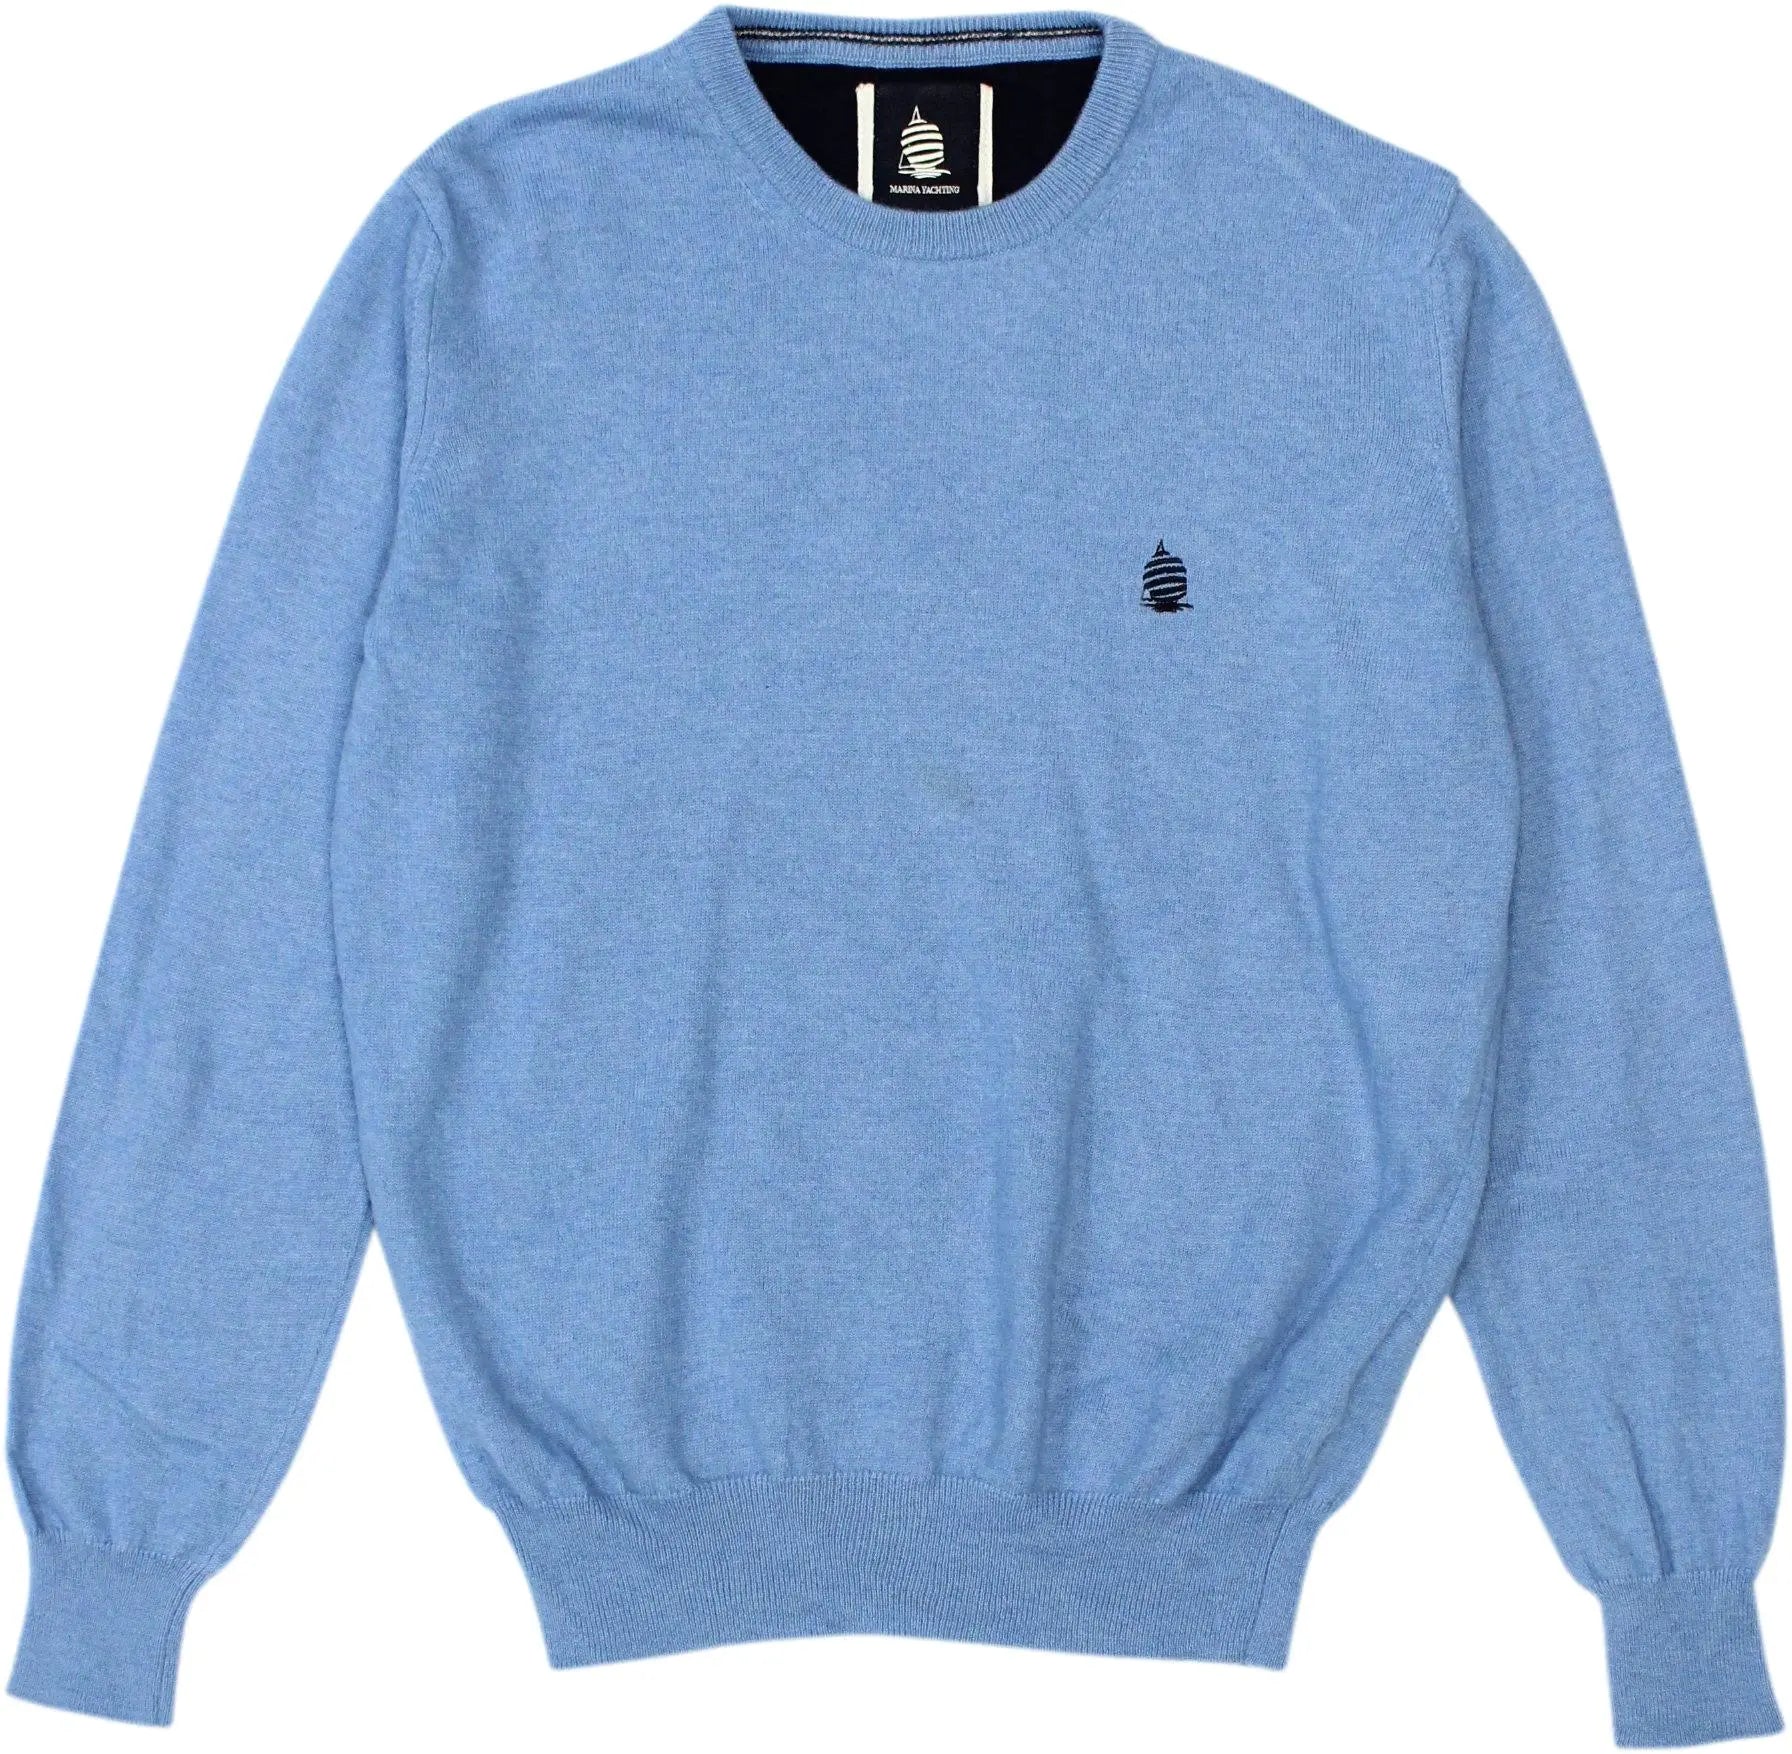 Marina Yachting - Blue Wool Blend Sweater- ThriftTale.com - Vintage and second handclothing